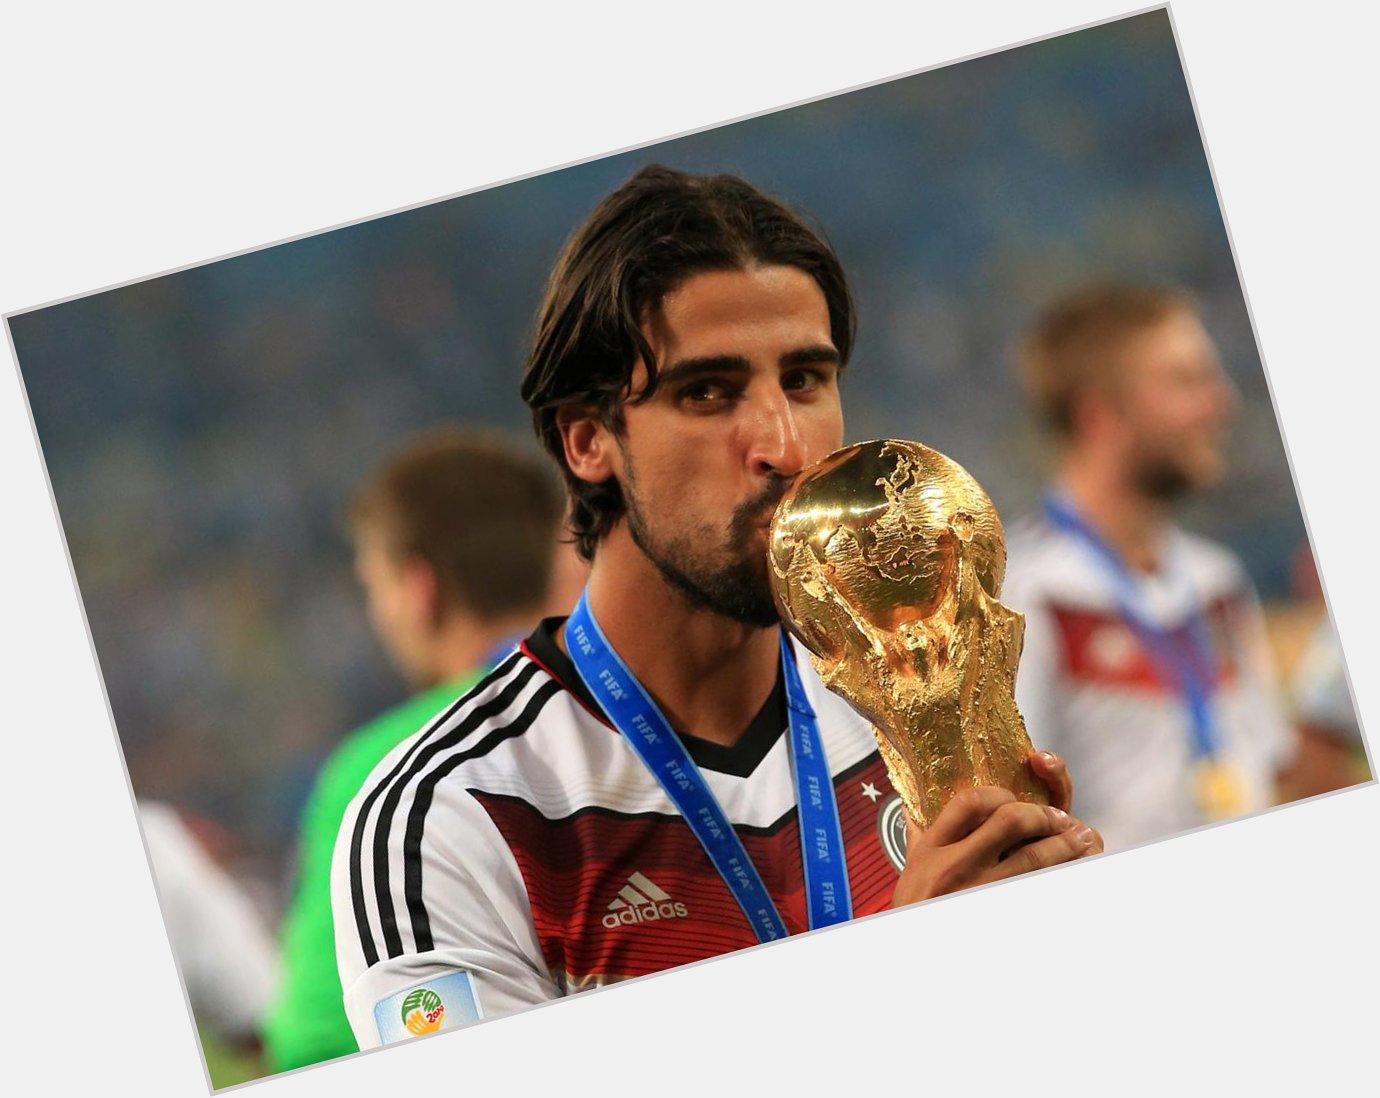 HAPPY BIRTHDAY to Sami Khedira. 28 today. Where will the Real Madrid man end up this summer? 